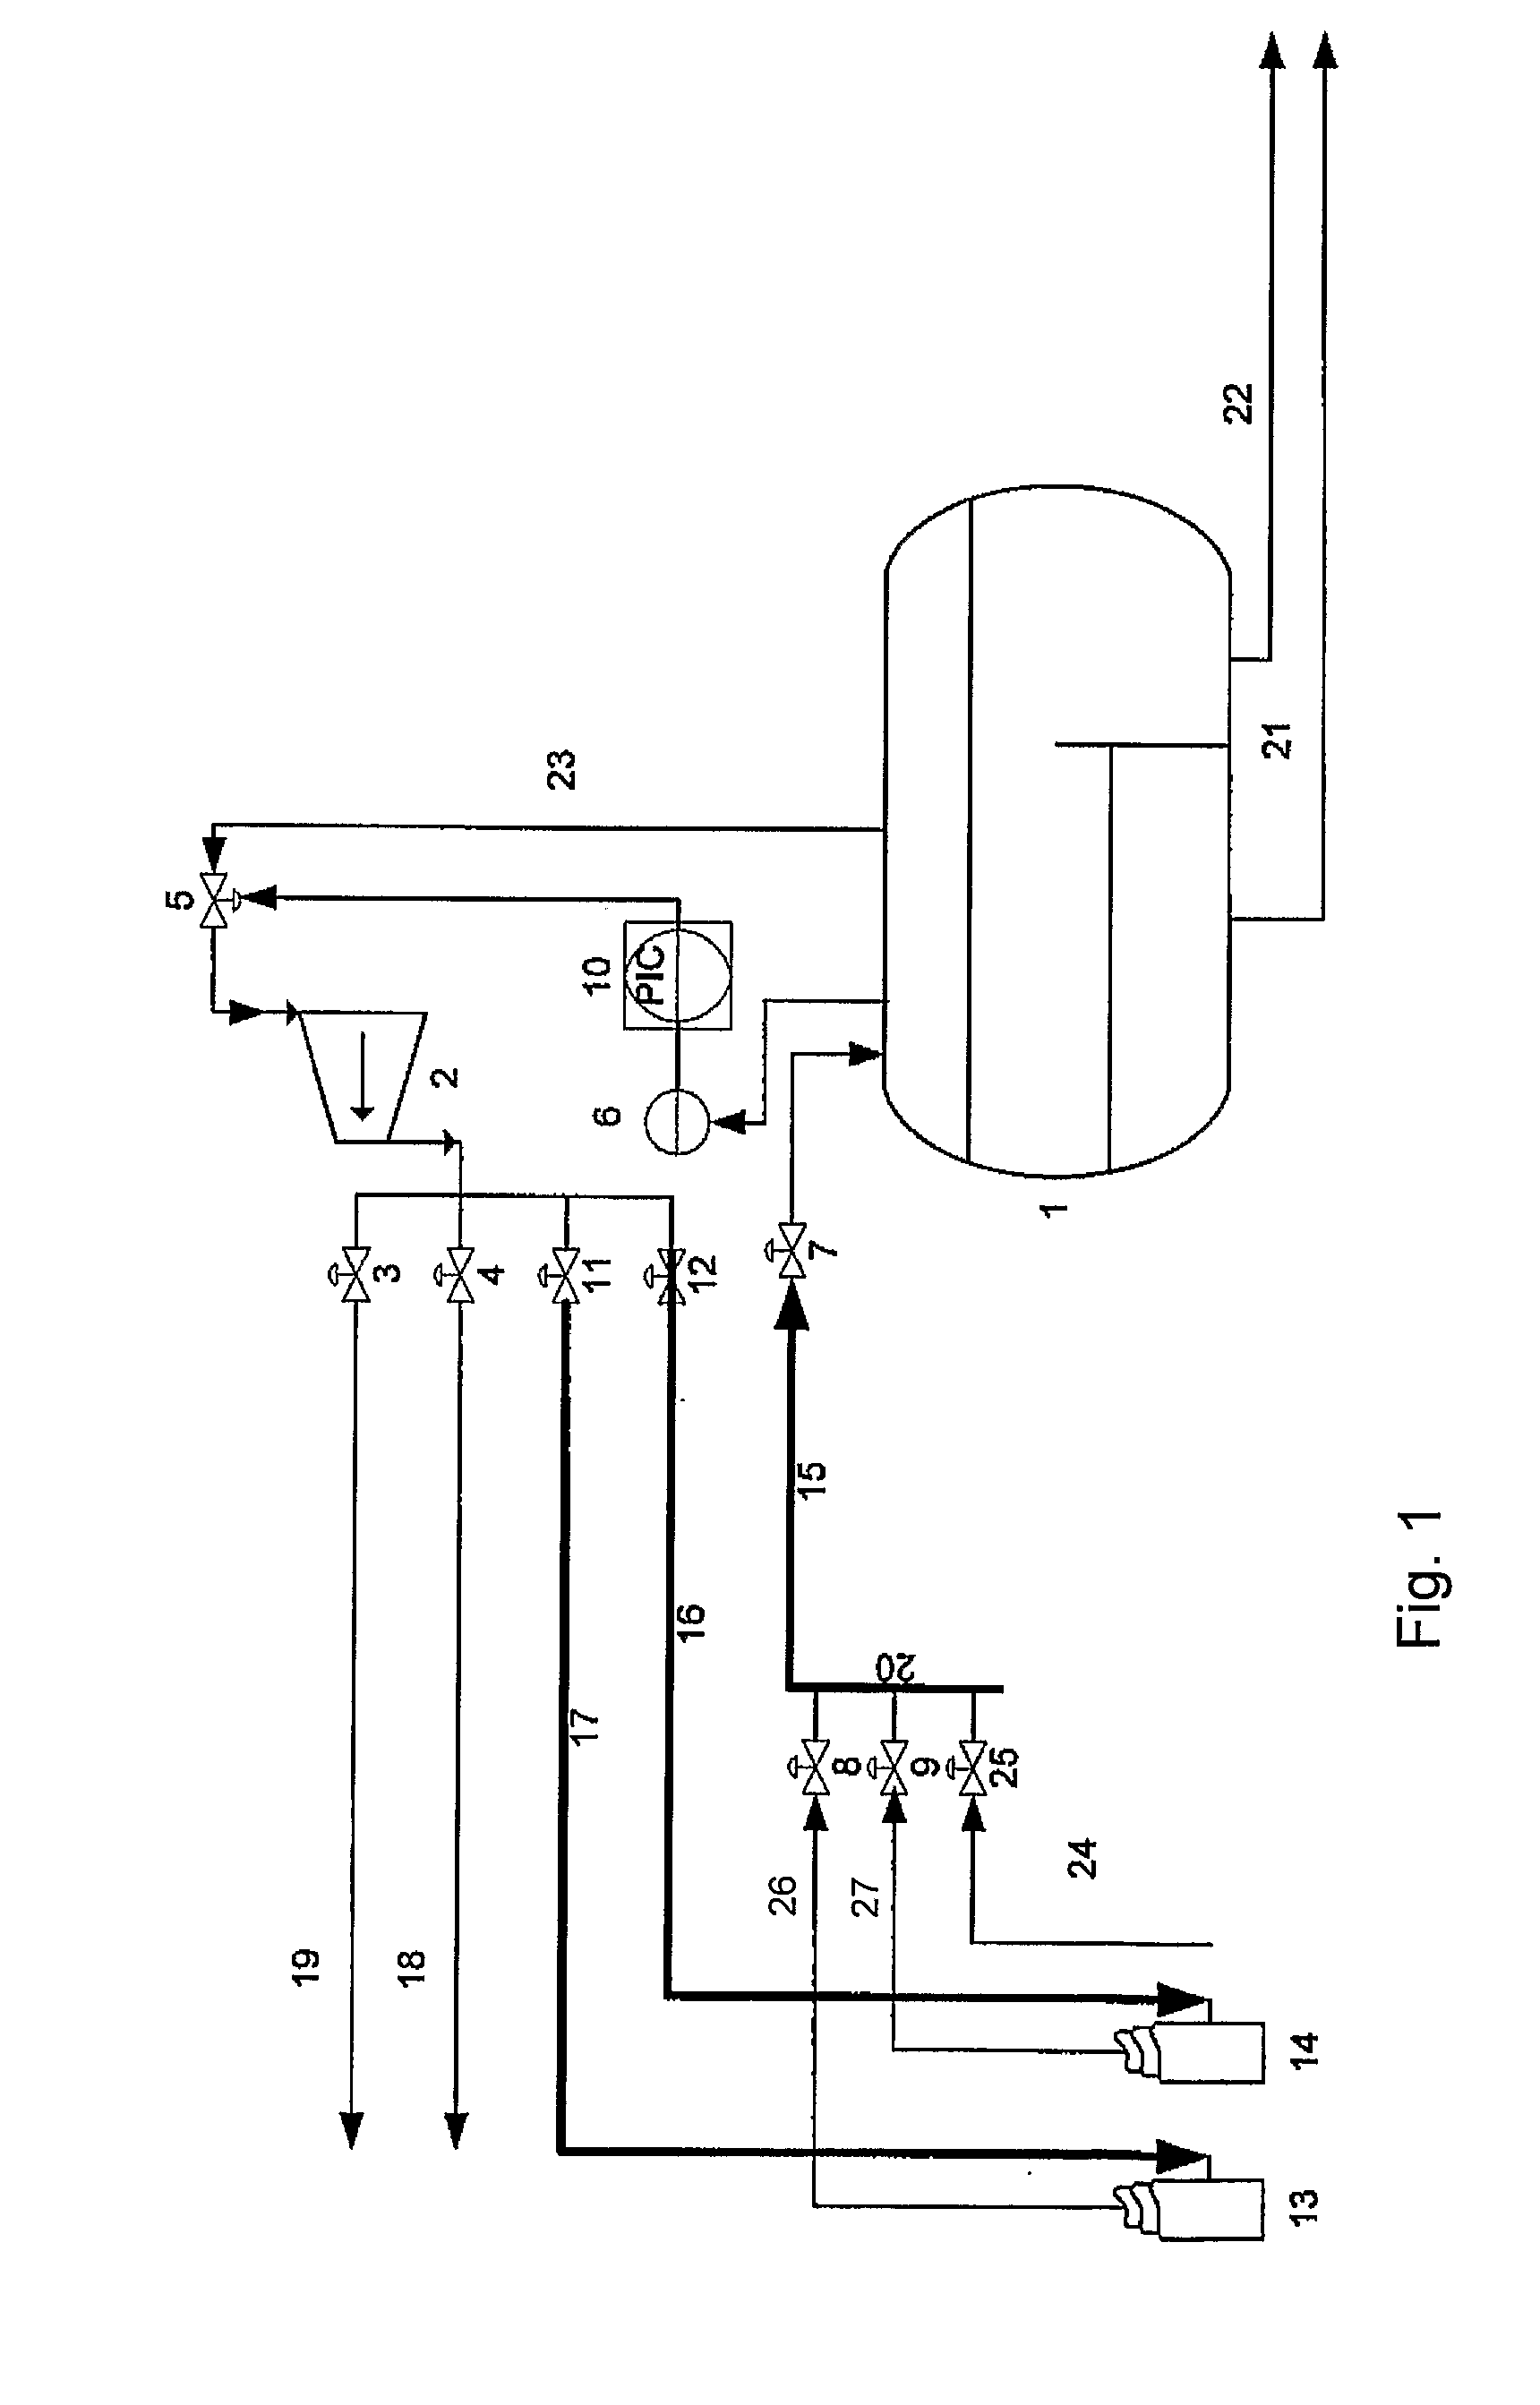 Method for production optimization in an oil and/or gas production system